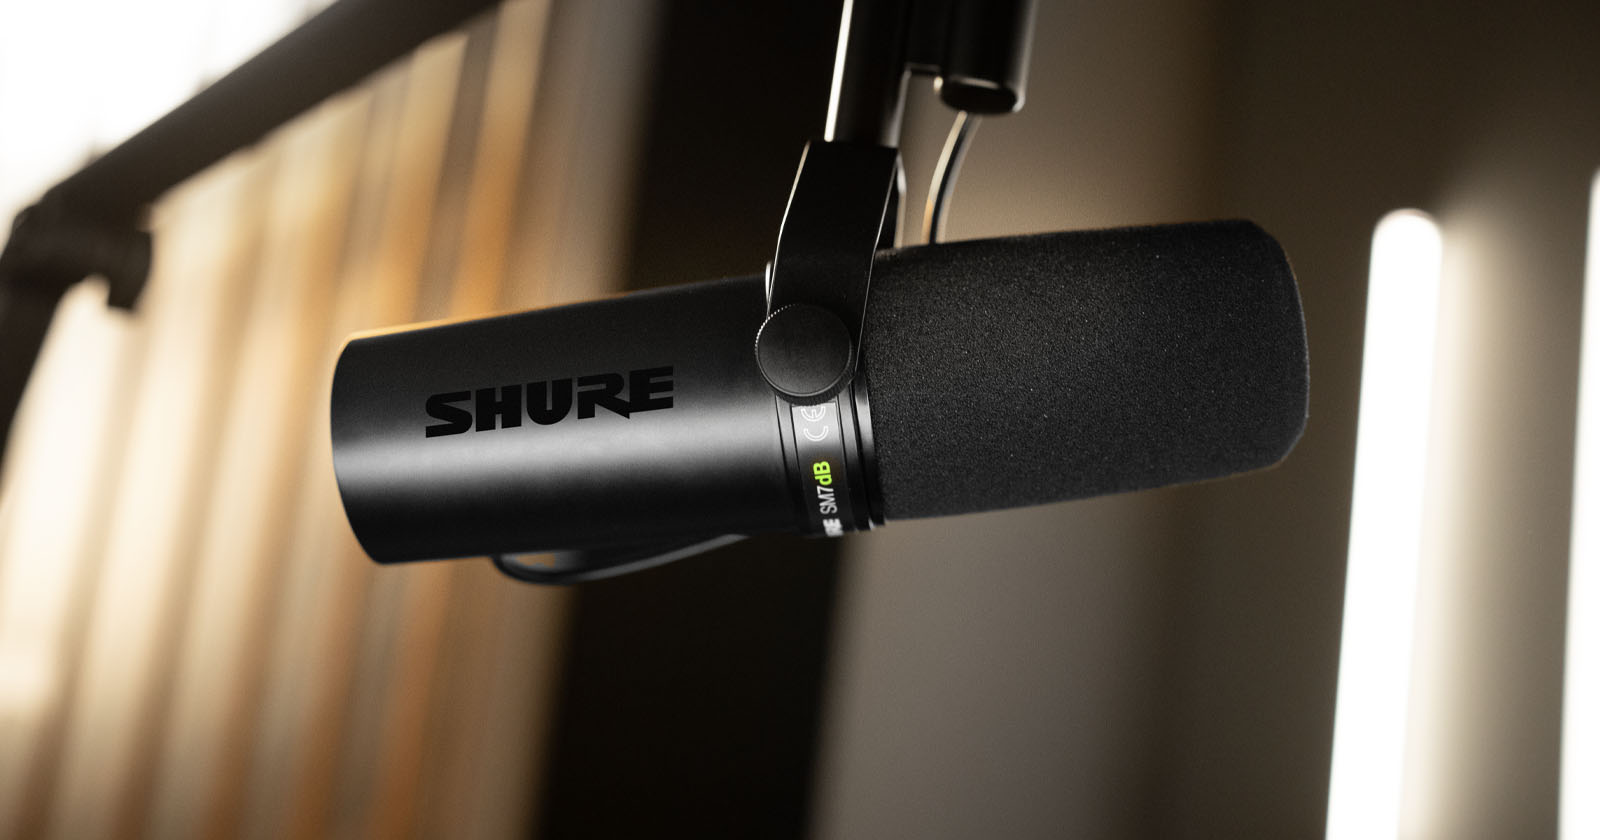 Shures New Vocal Mic Has a Built-In Preamp to Simplify Audio Workflows